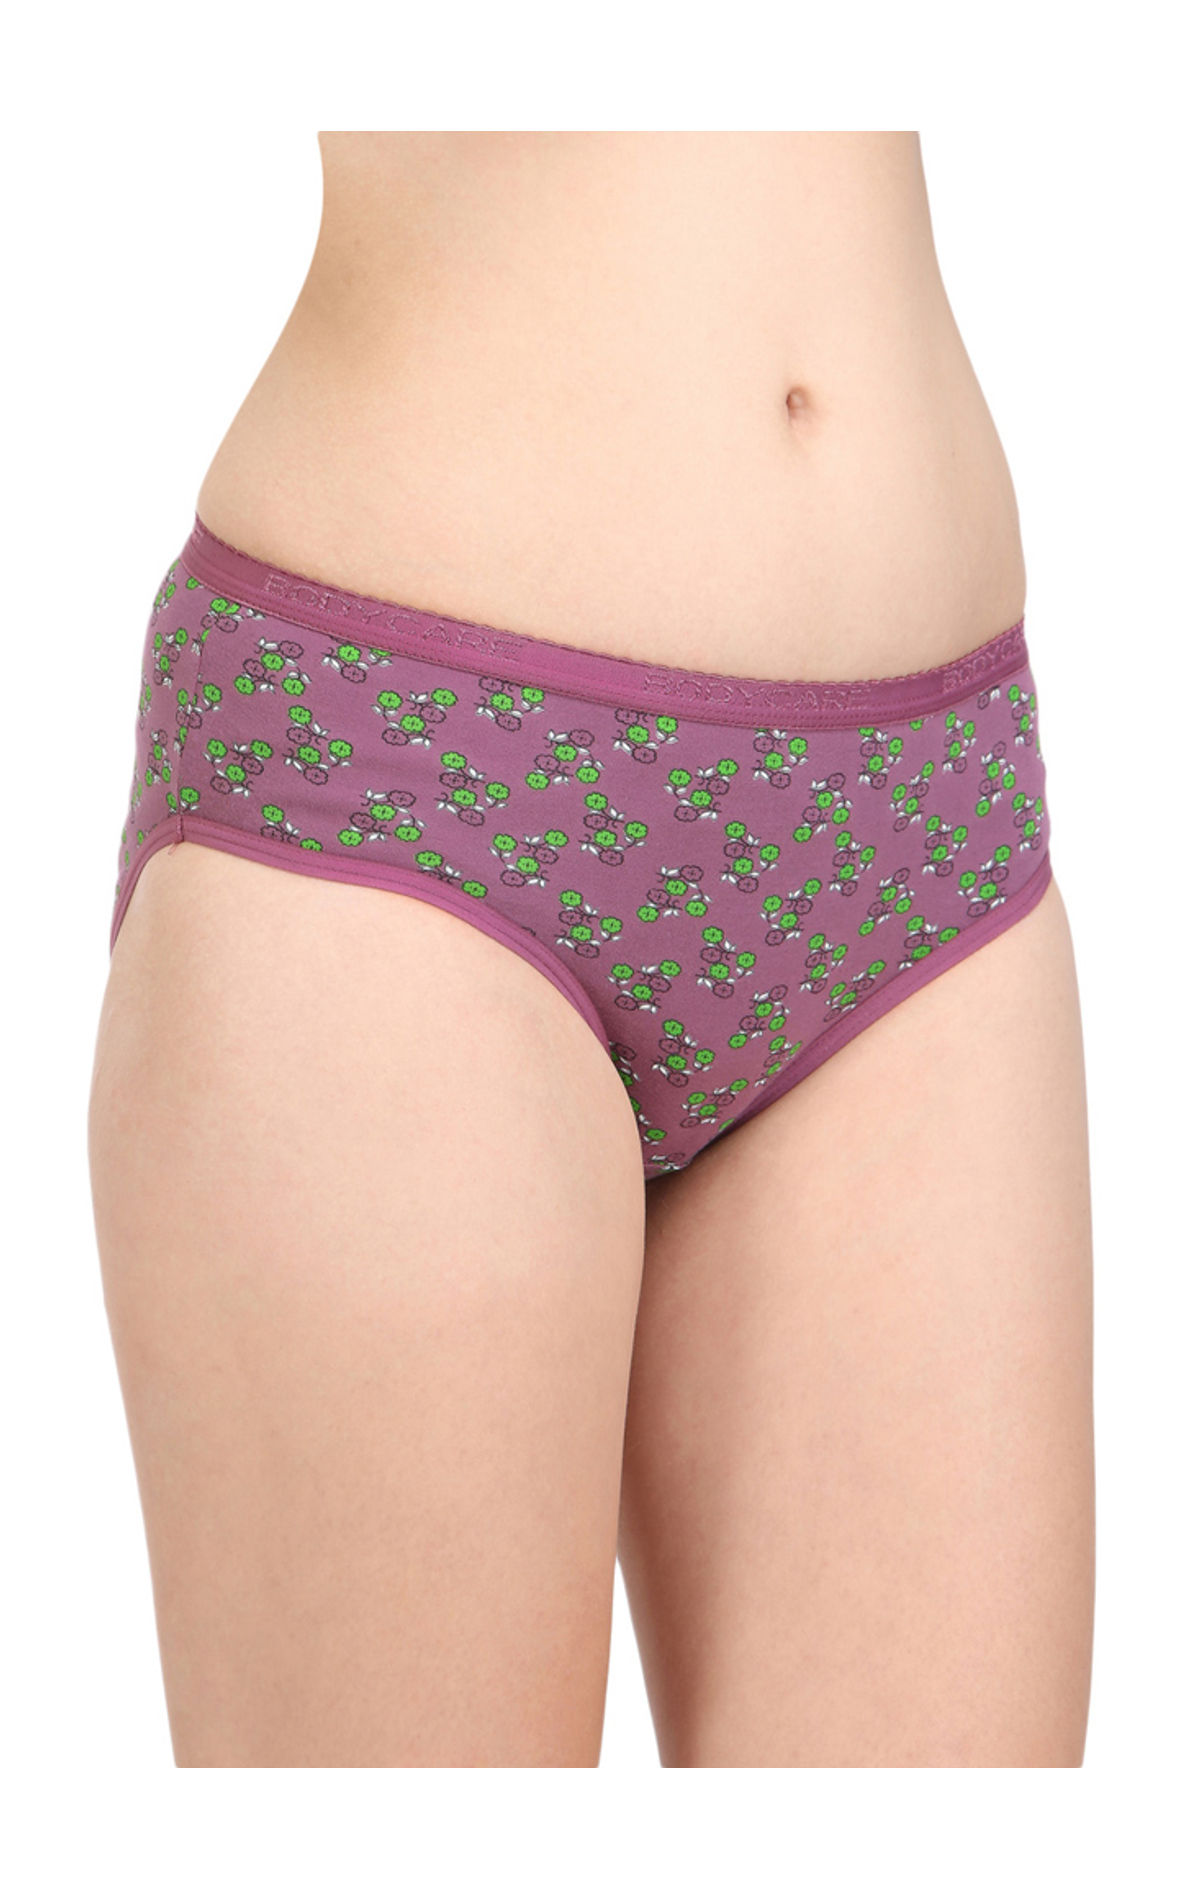 Buy BODYCARE Pack of 2 Shaping Panty in Hipster Style Cotton Brief -  E25C-2PCS Assorted at